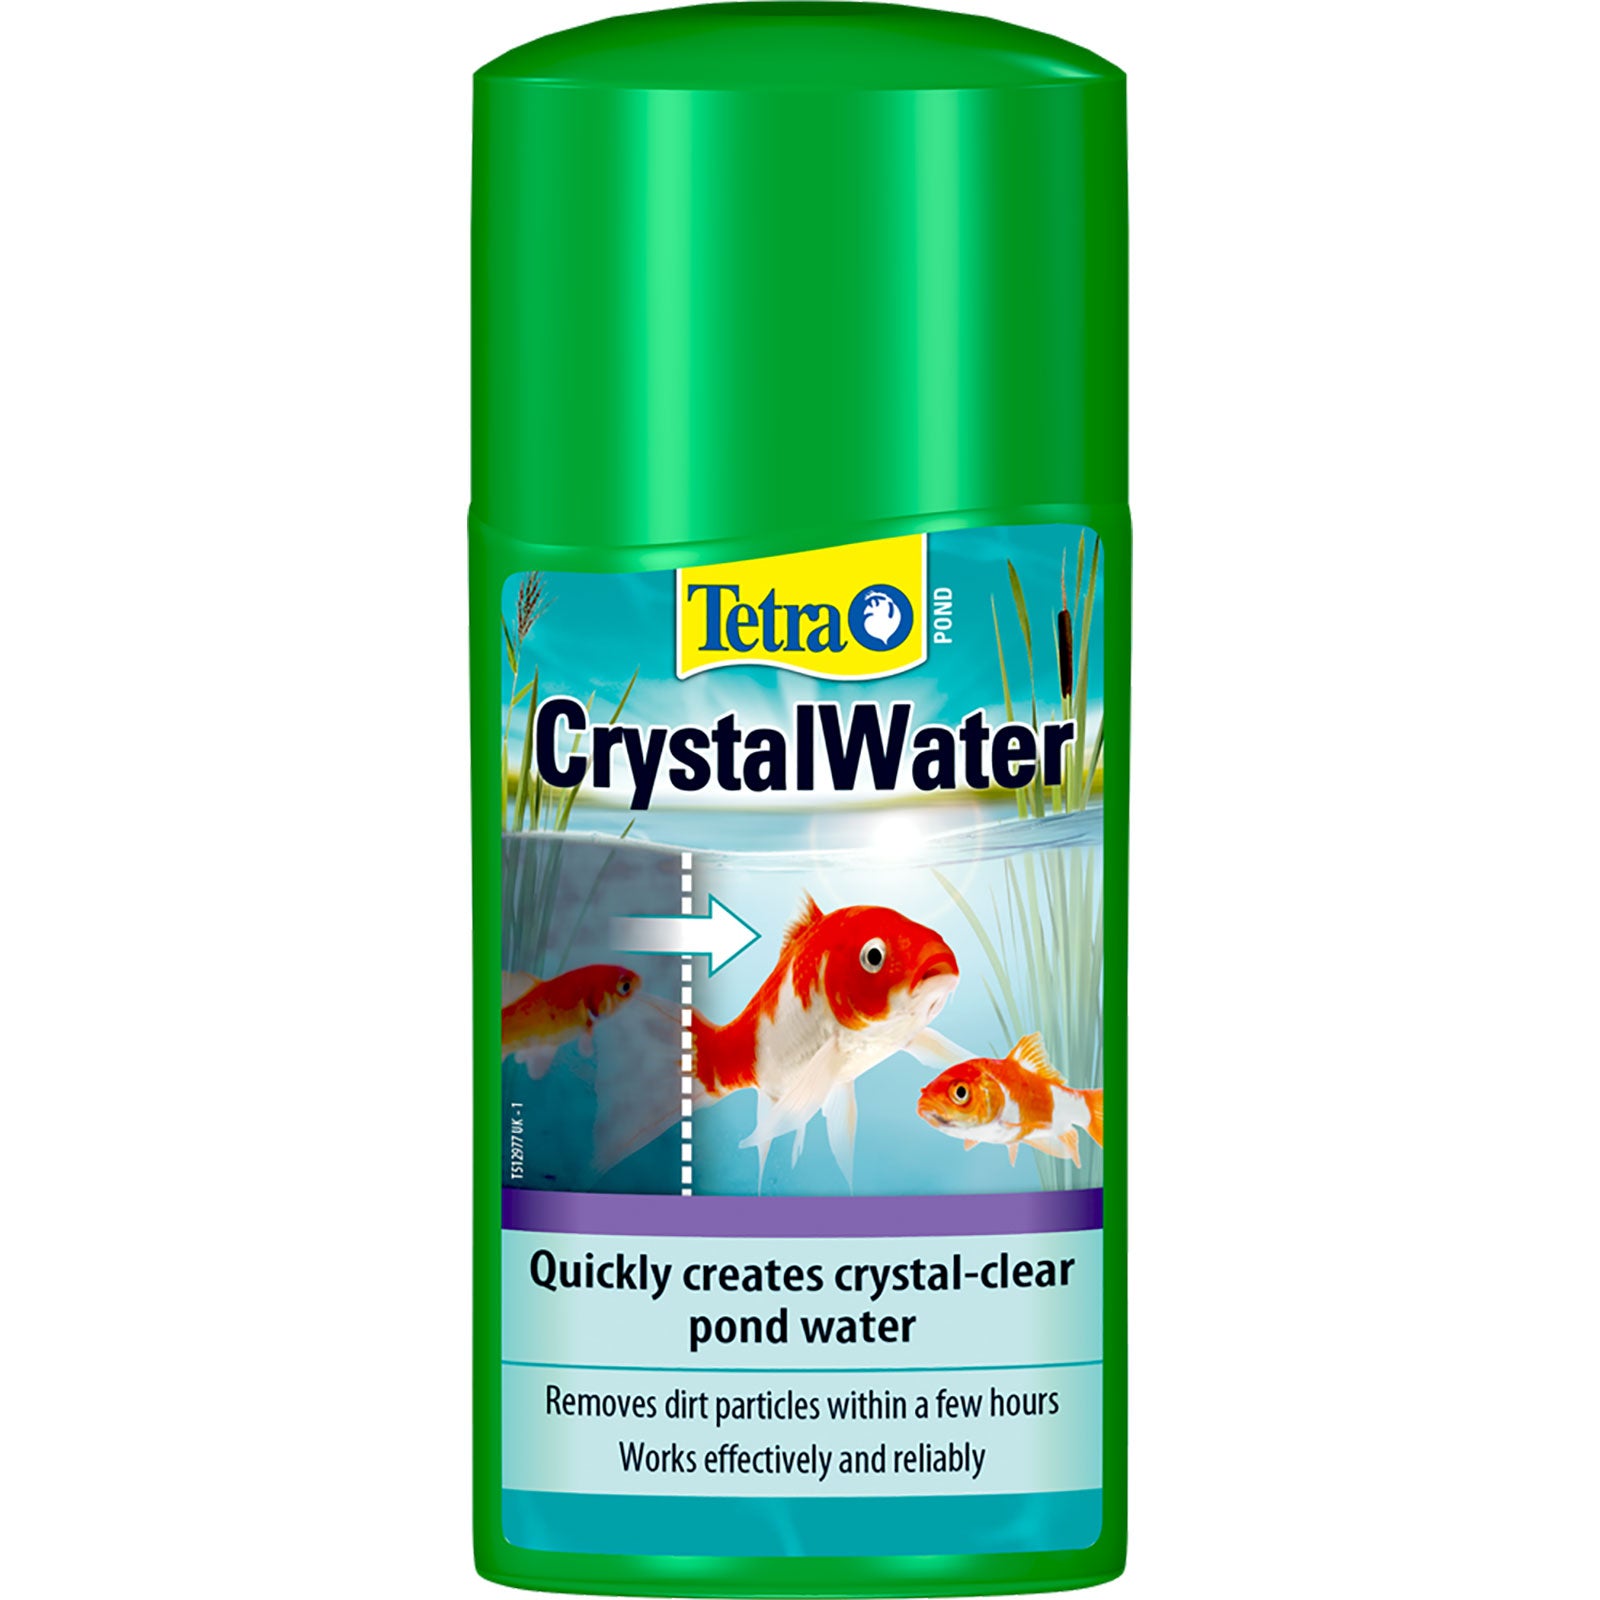 Tetra Crystal Water 1L - Improves the water quality in the pond